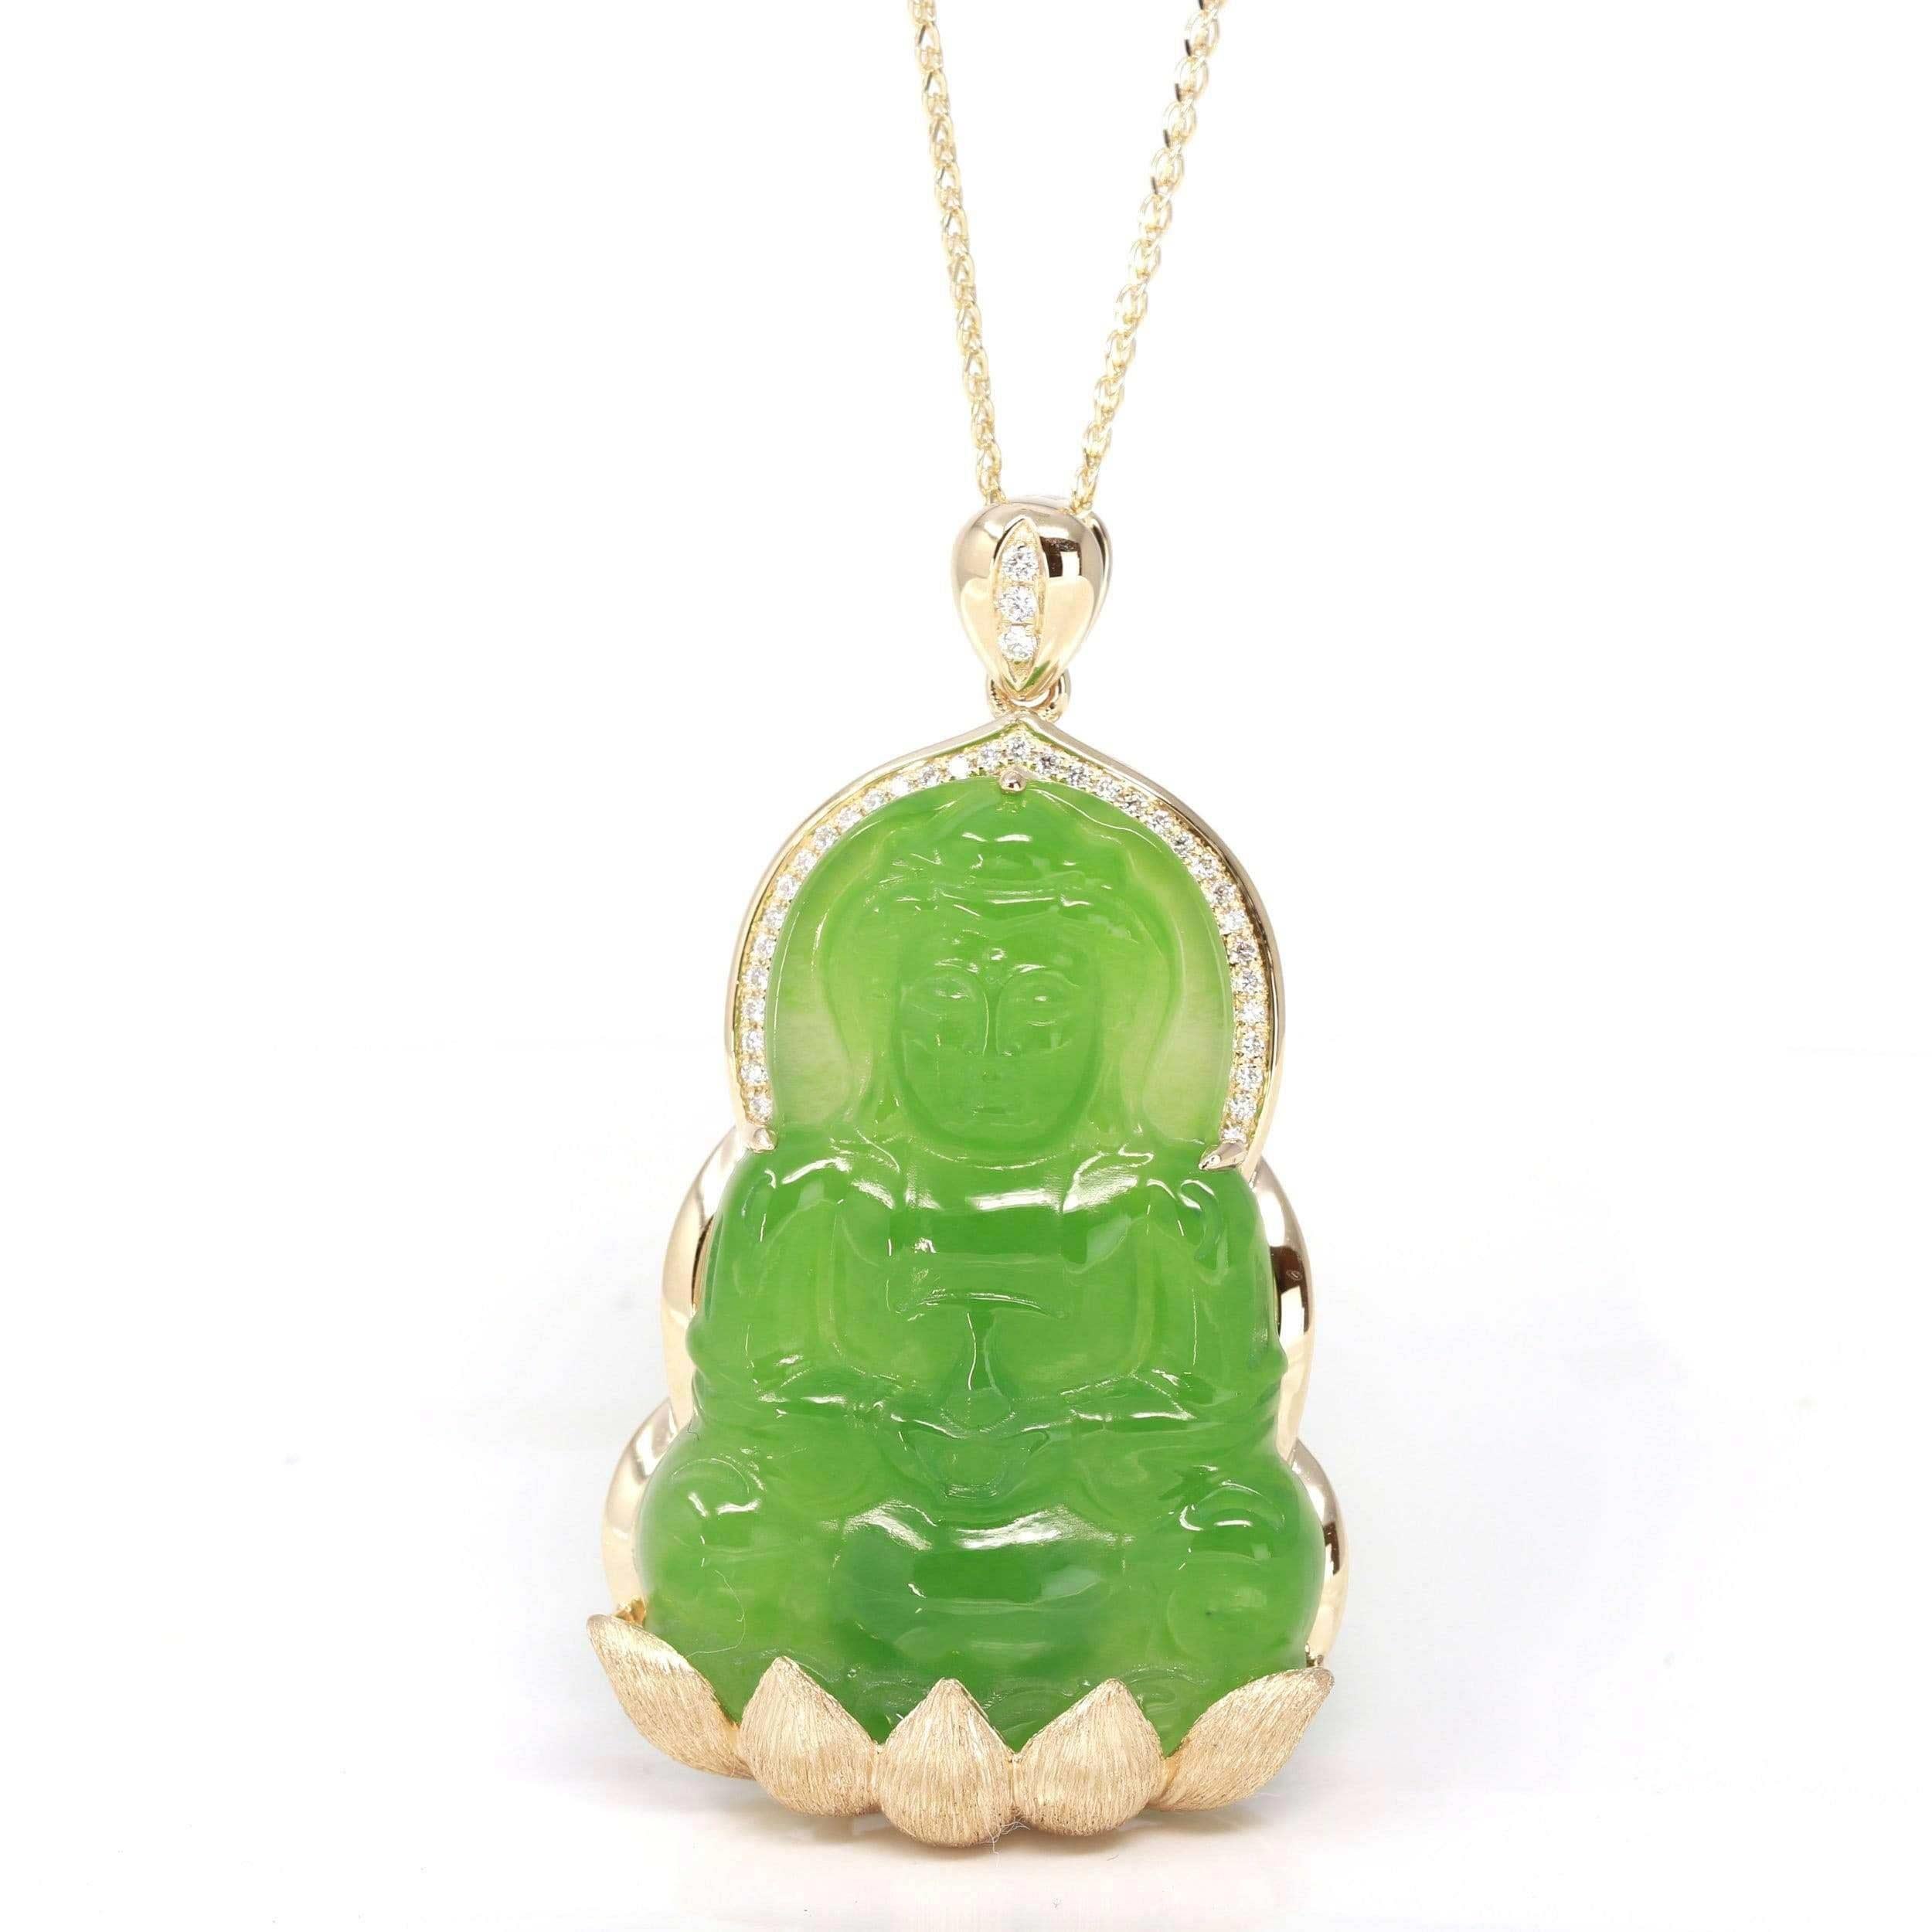 DETAILS--- 14K Yellow Gold Genuine Nephrite Luxury Apple Green Jade Guanyin Pendant Necklace. This pendant is made with very high-quality genuine apple green jade, The green jade texture is so smooth and translucent. It's very perfect without flaws.